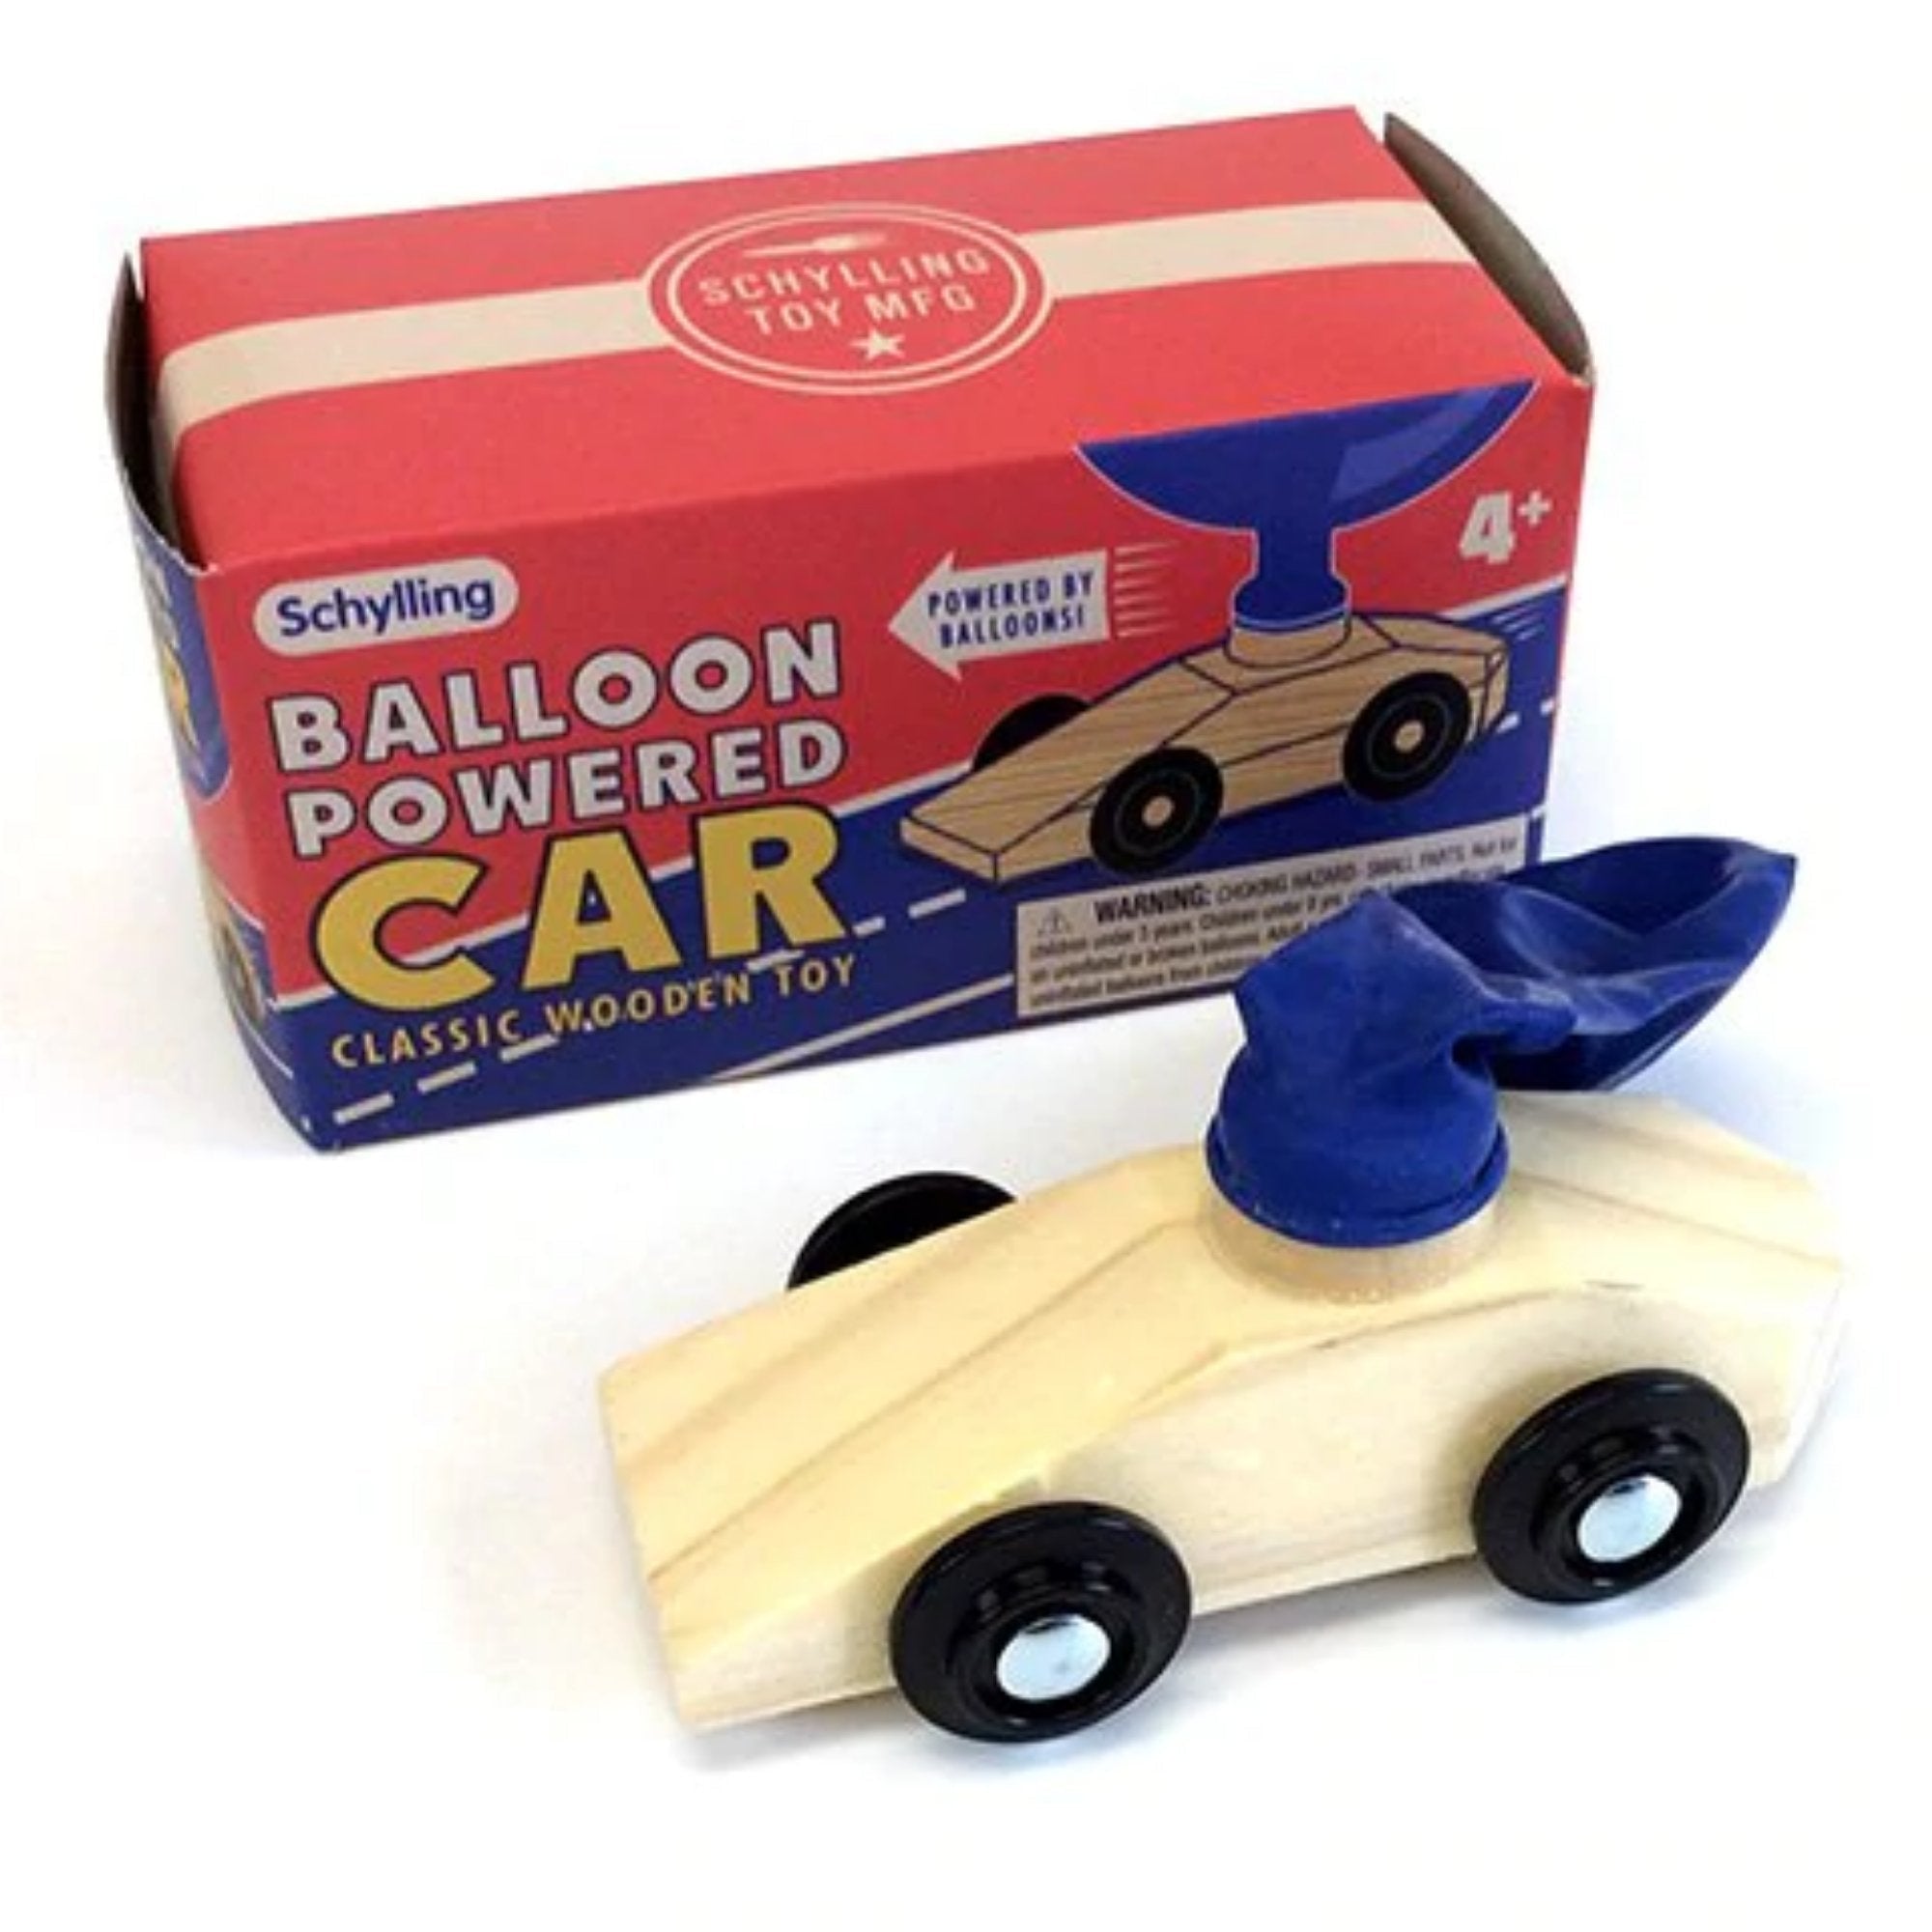 Balloon Cars, Introducing the amazing Balloon Powered Car! This innovative toy takes the simple act of blowing air into a balloon and turns it into an exhilarating race car experience. With just a lung full of air, watch as this speedy racer builds up incredible speed and zooms off!The Balloon Car is not just a source of endless entertainment; it also provides valuable visual stimulation and sensory input for individuals with Autism Spectrum Disorders and Sensory Processing Disorder. The vibrant colors and 